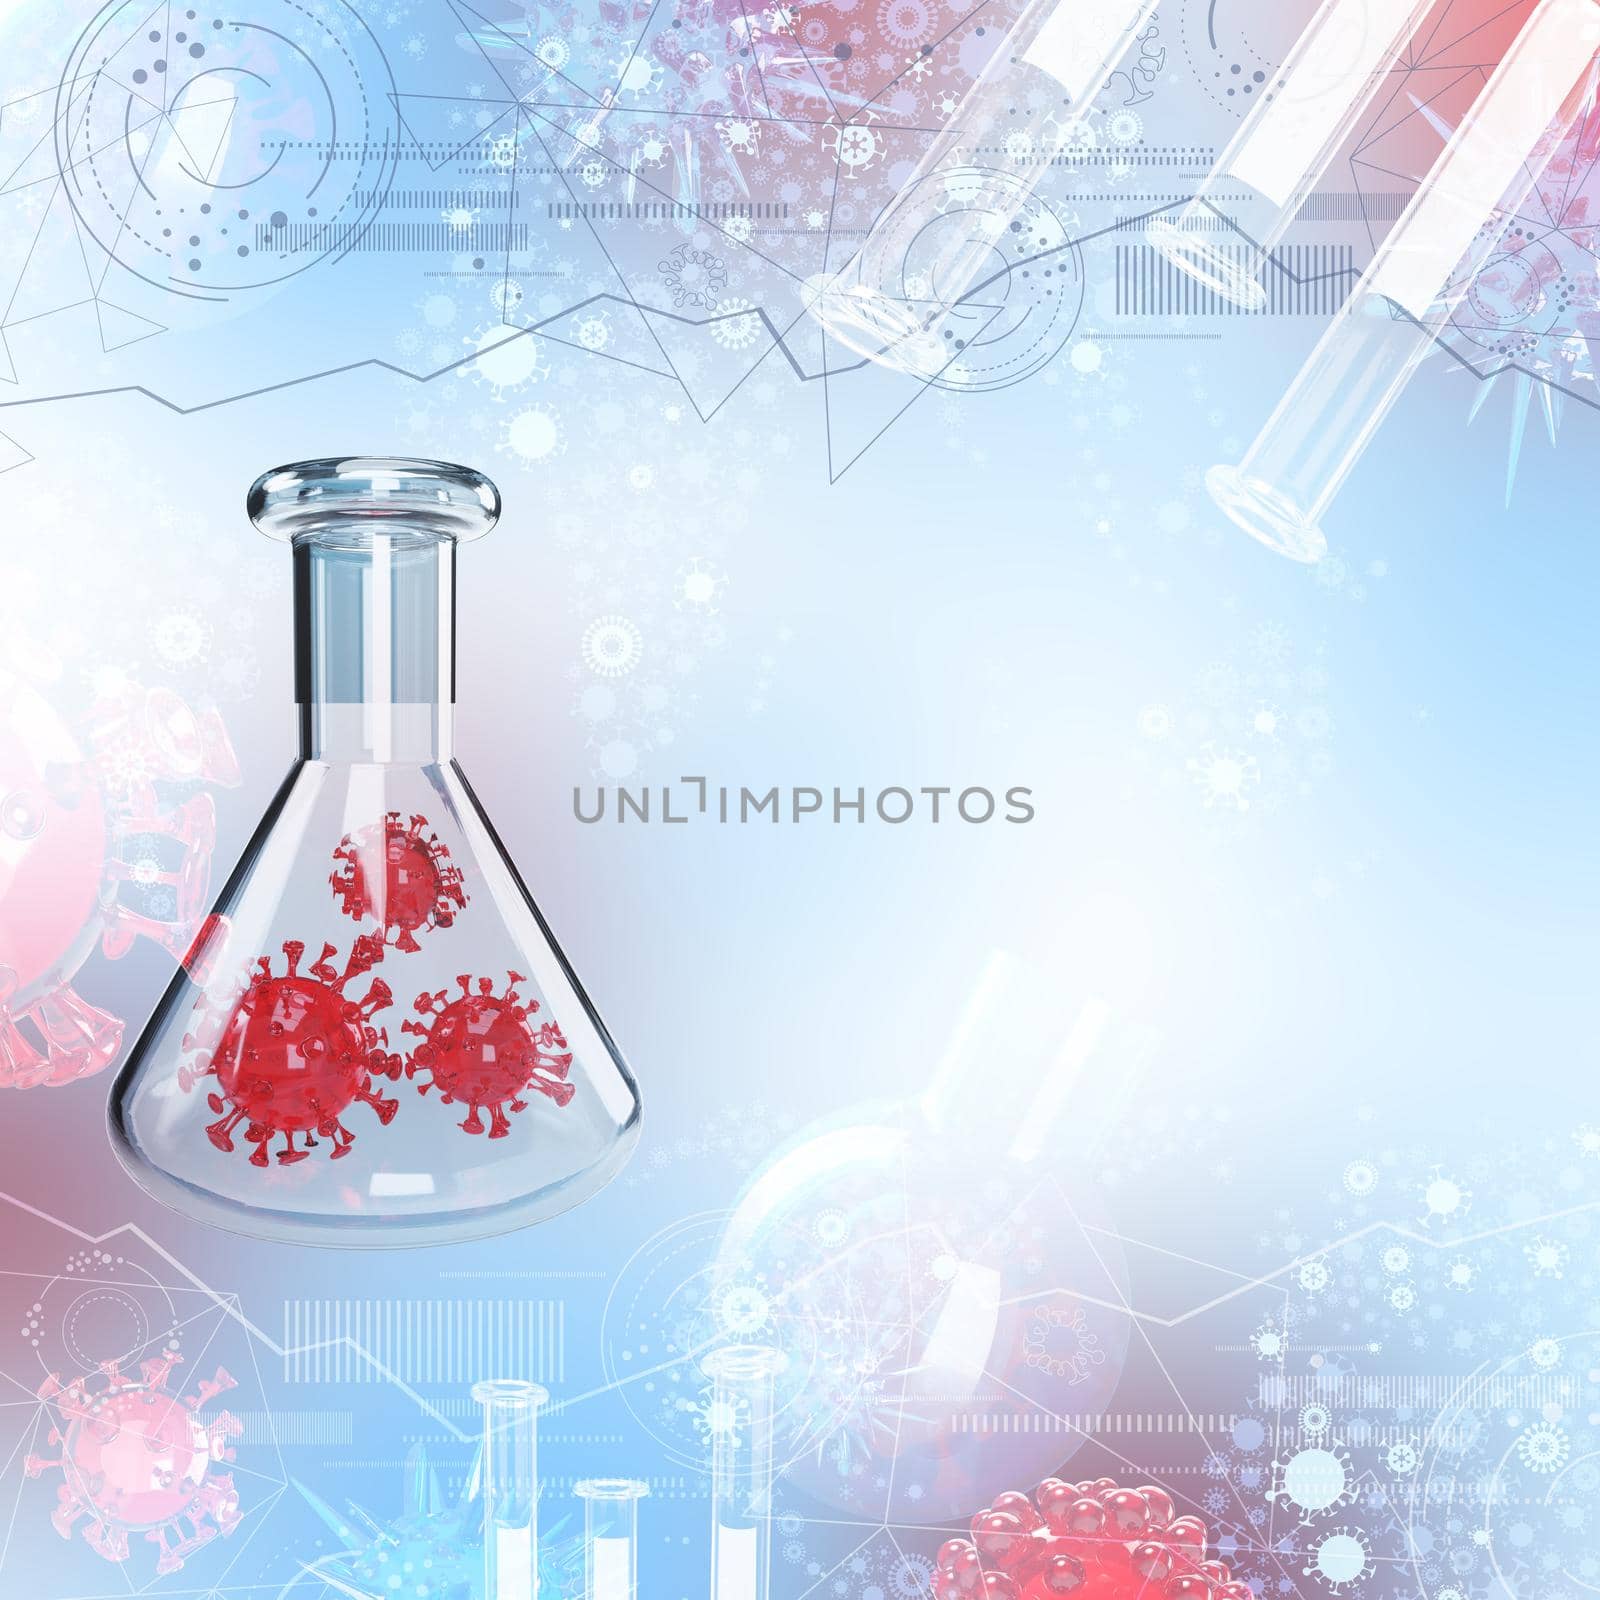 Antiviral drug research light blue abstract 3d illustration by kisika